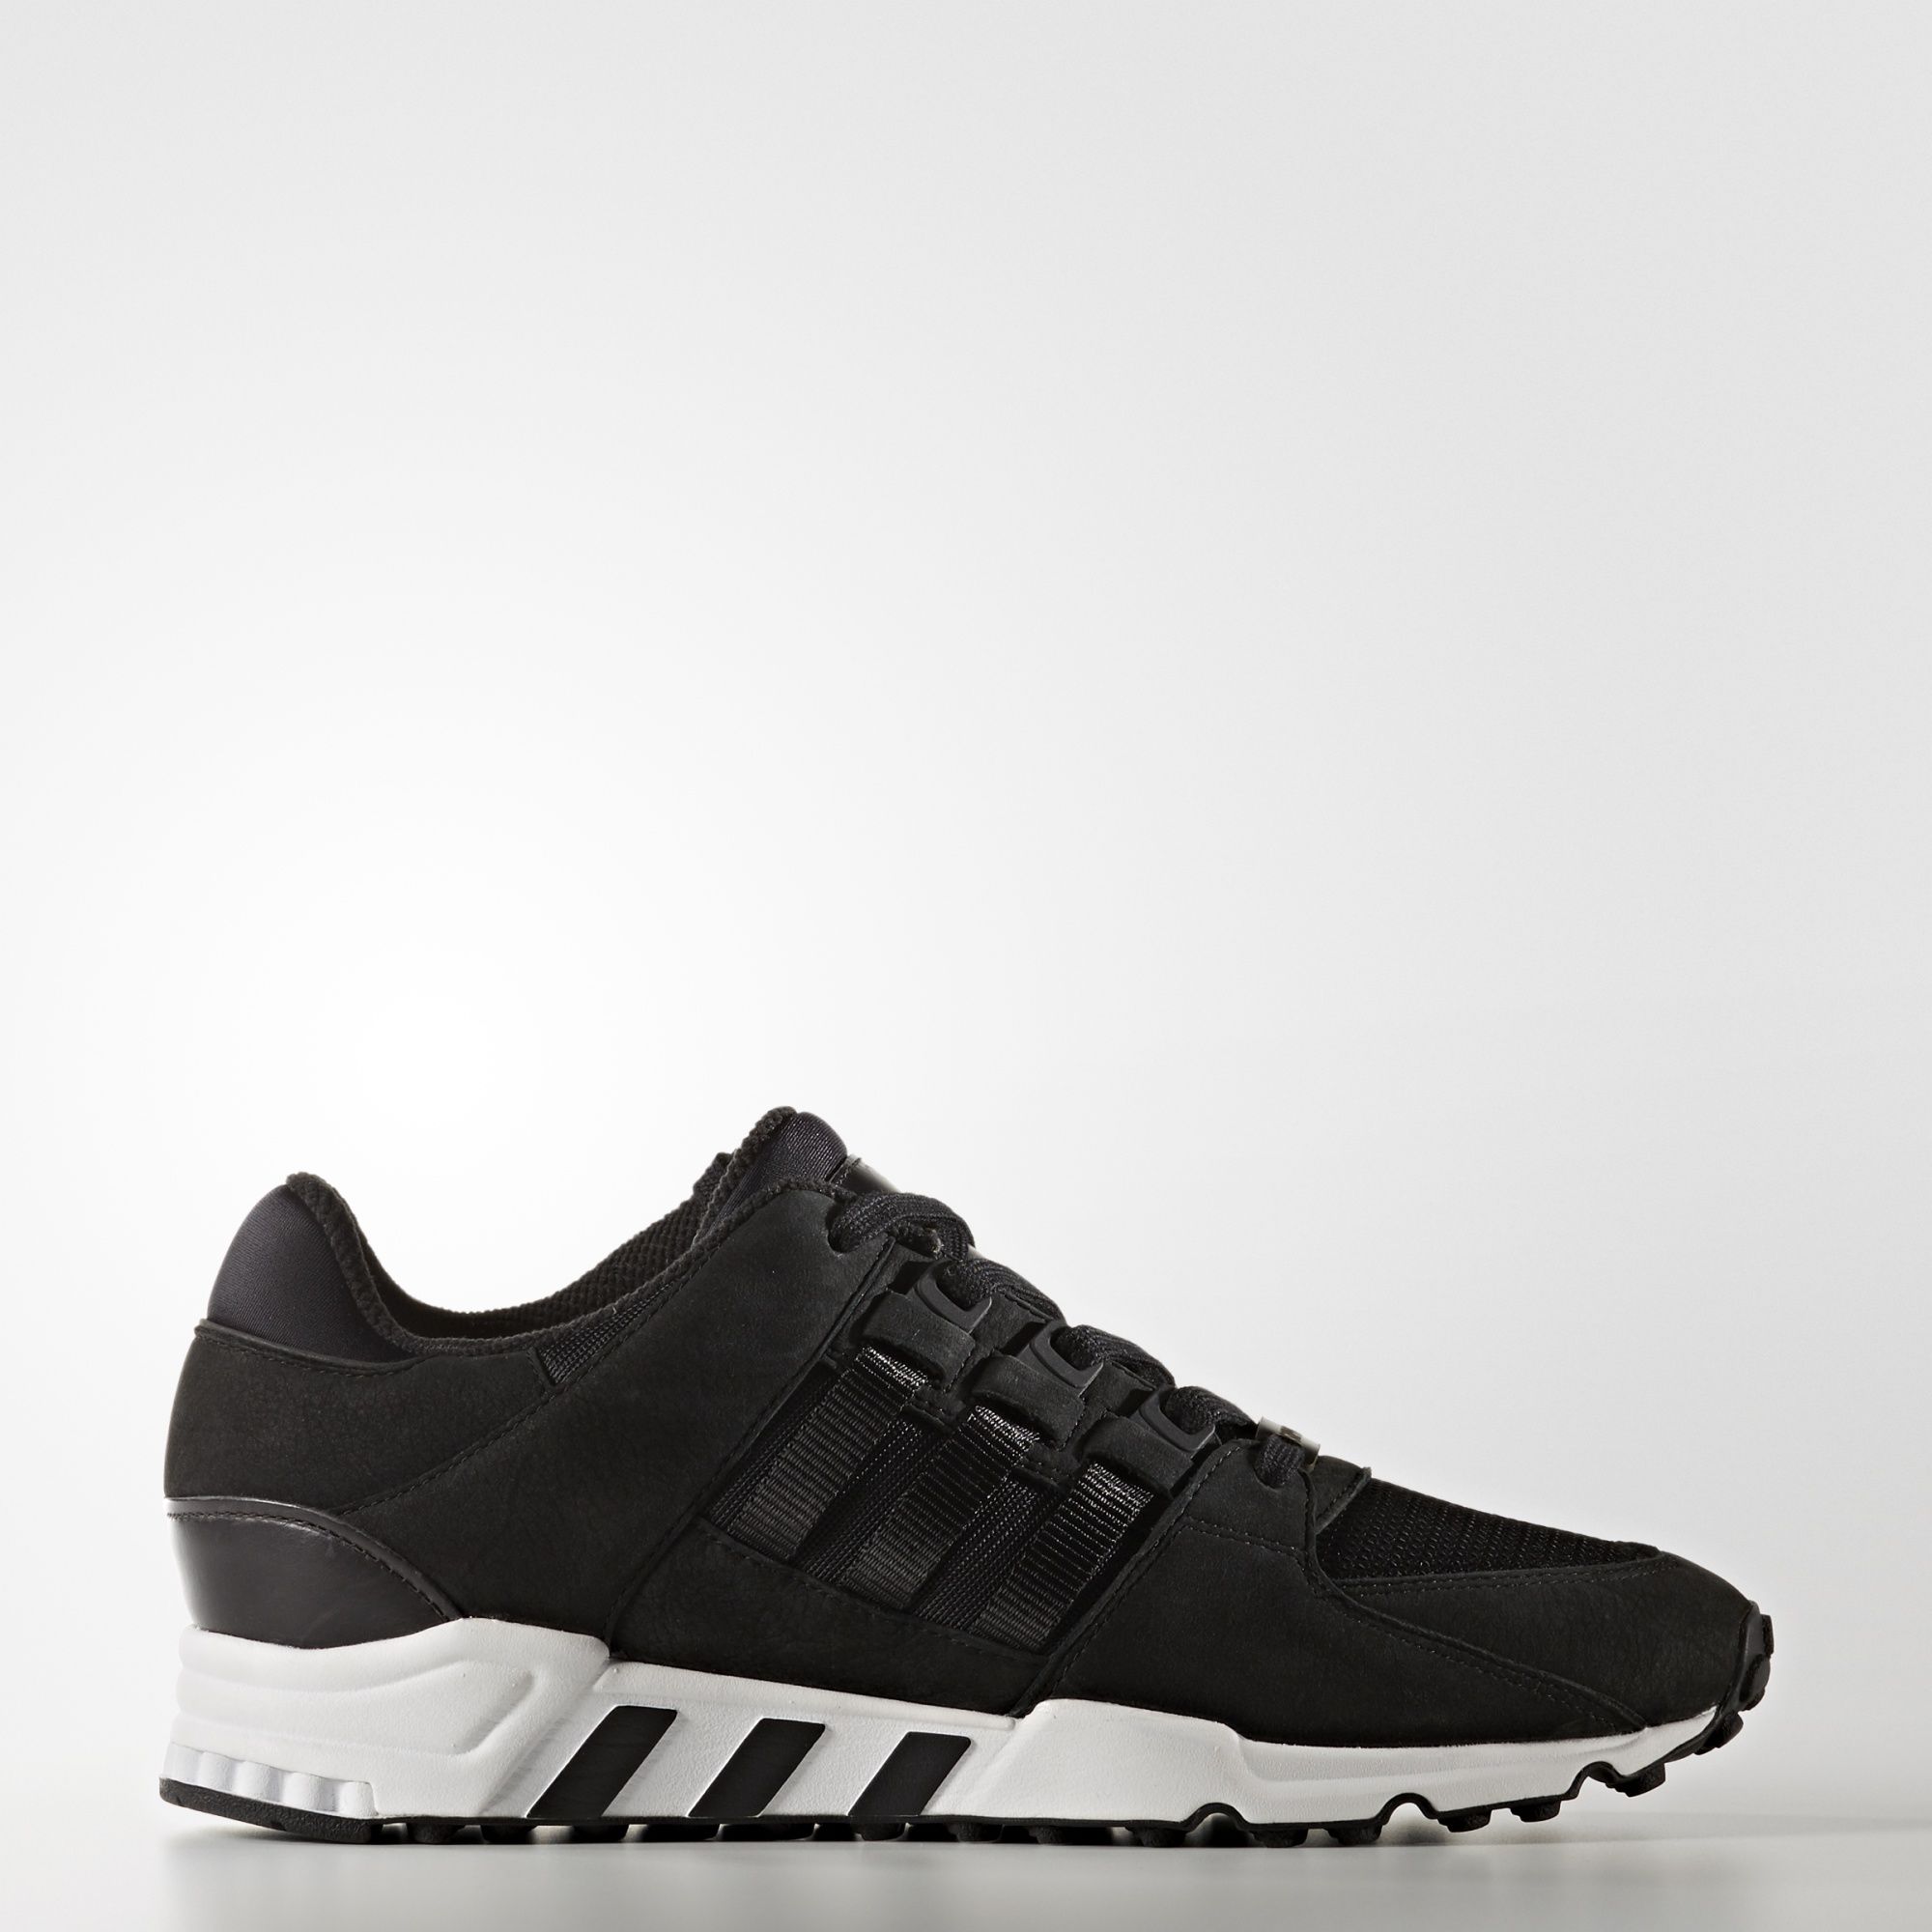 adidas-eqt-support-rf-milled-leather-pack-2